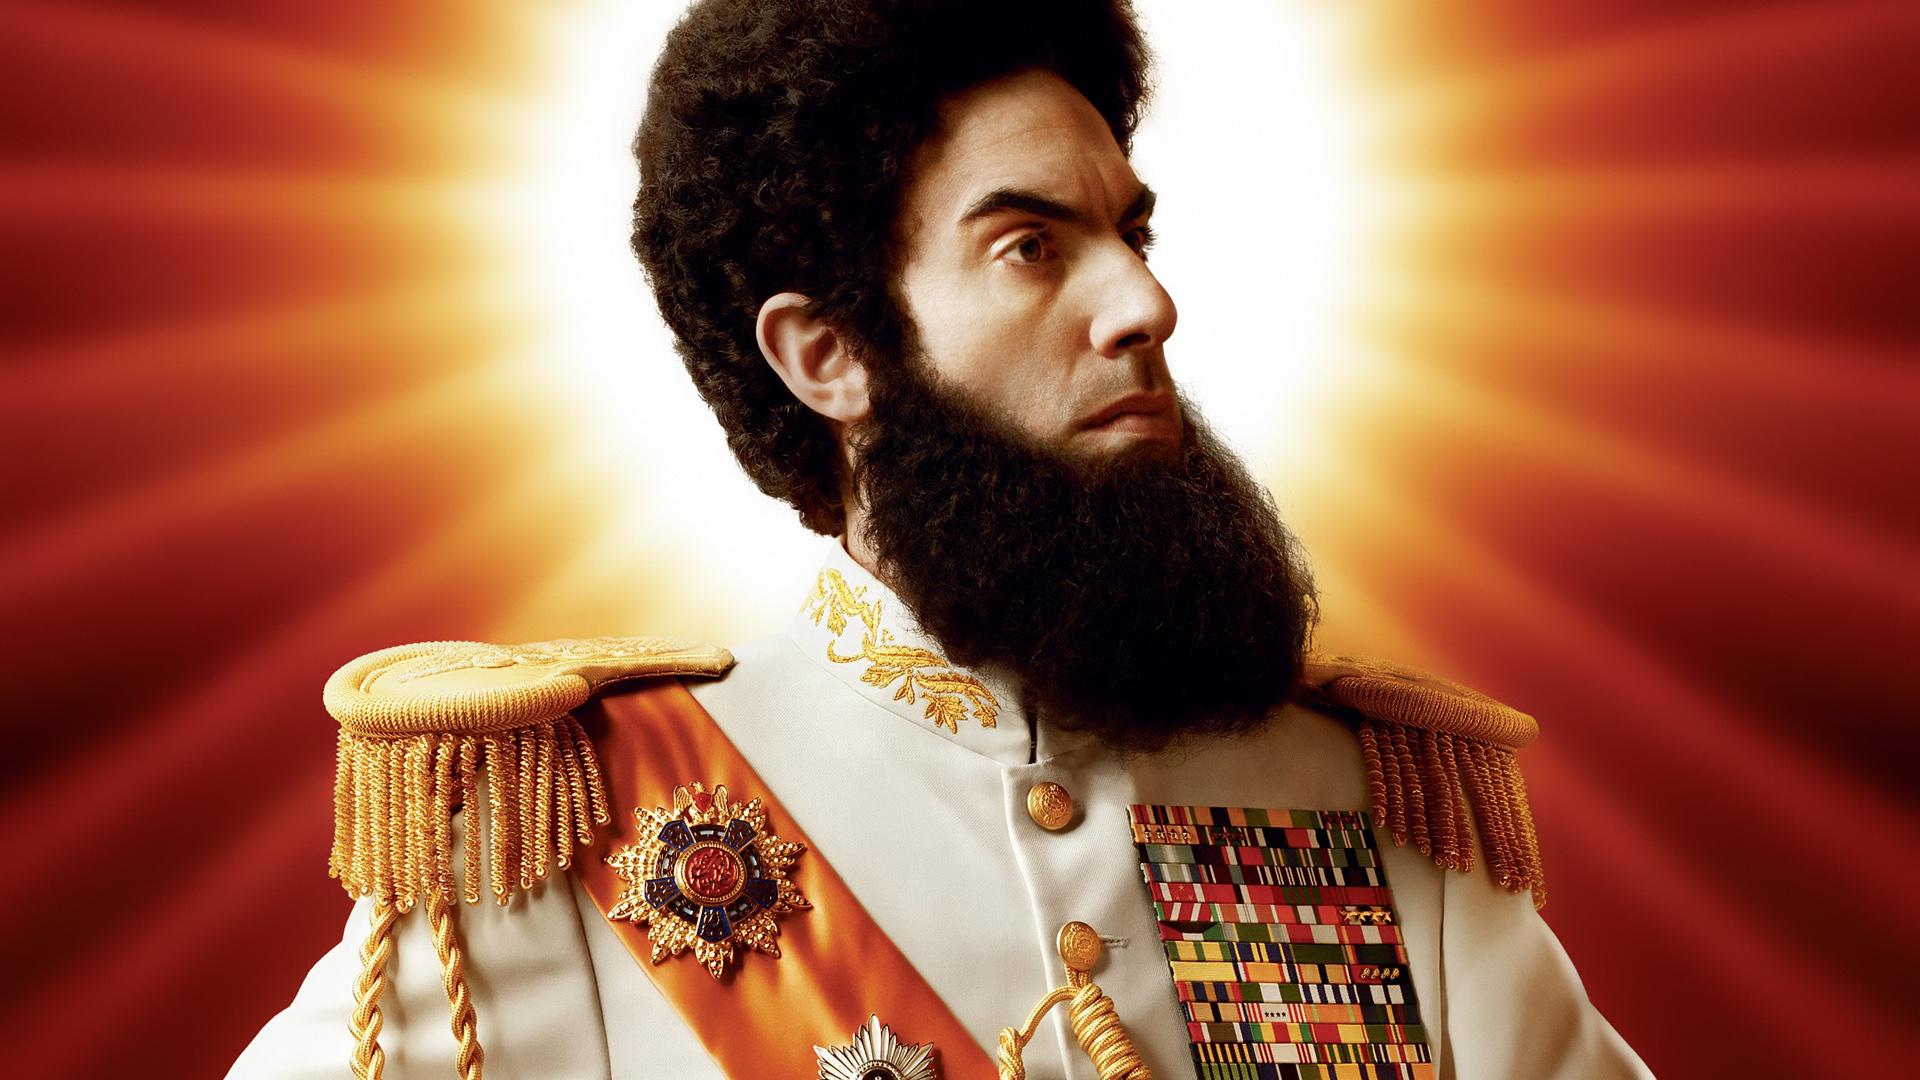 The Dictator HD Wallpaper. Background Imagex1080